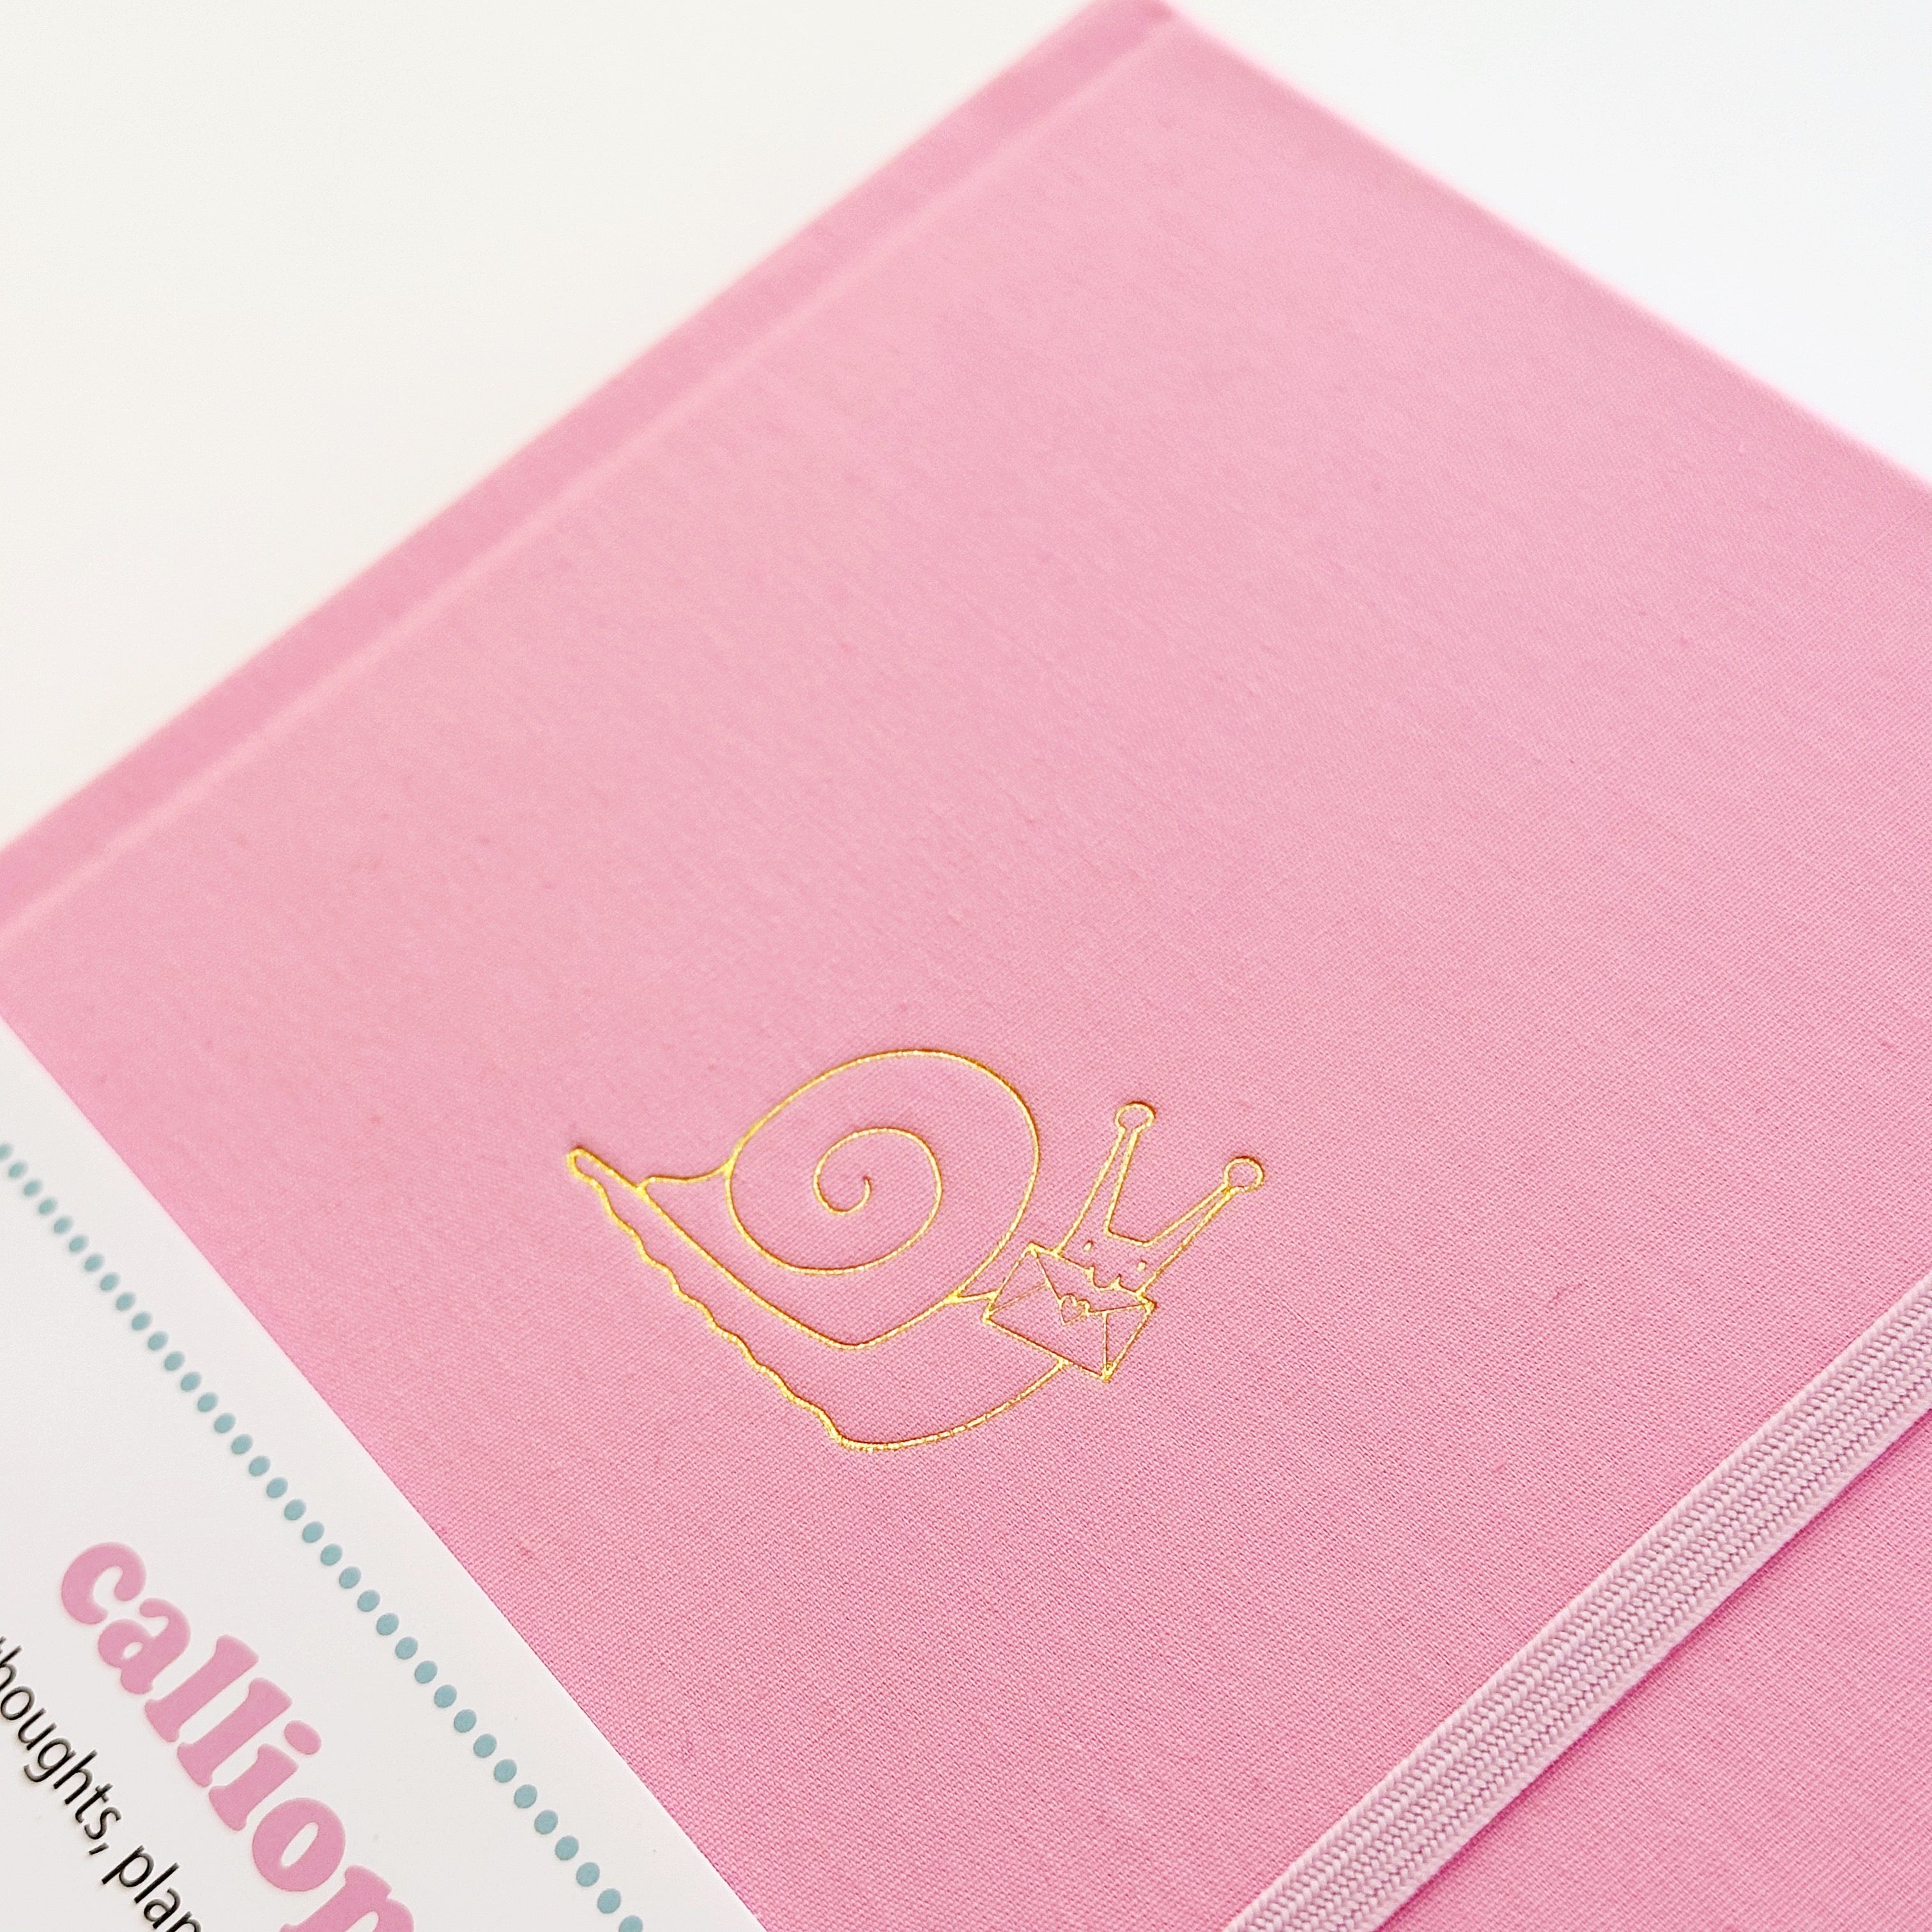 Image of pink journal with image of gold foil snail and pink elastic strap on right side to hold closed.